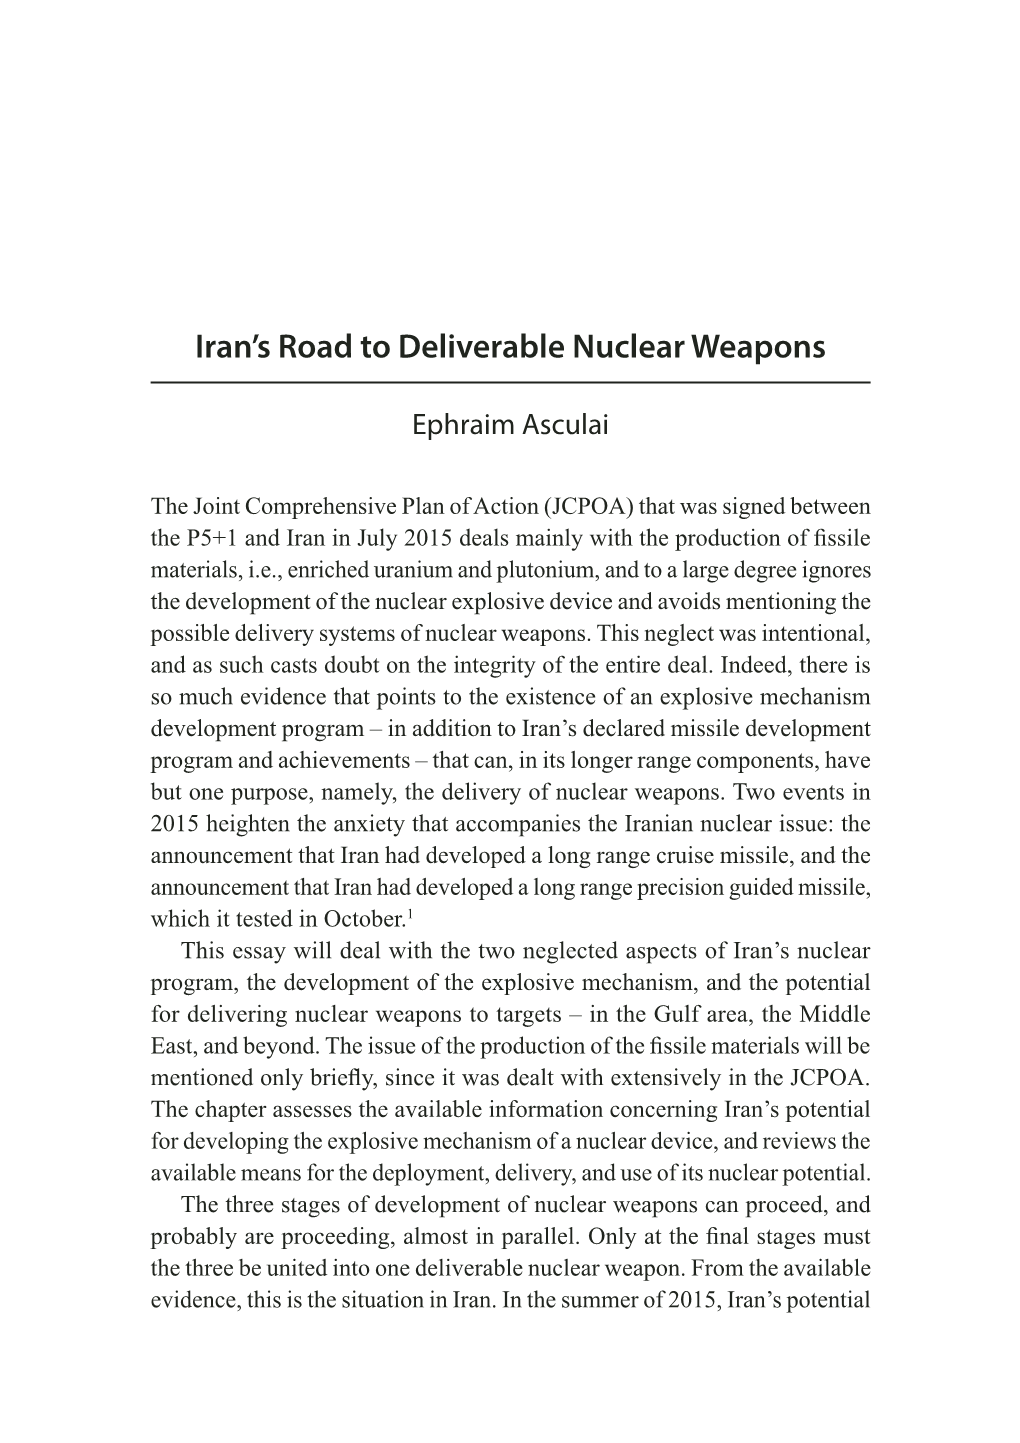 Iran's Road to Deliverable Nuclear Weapons